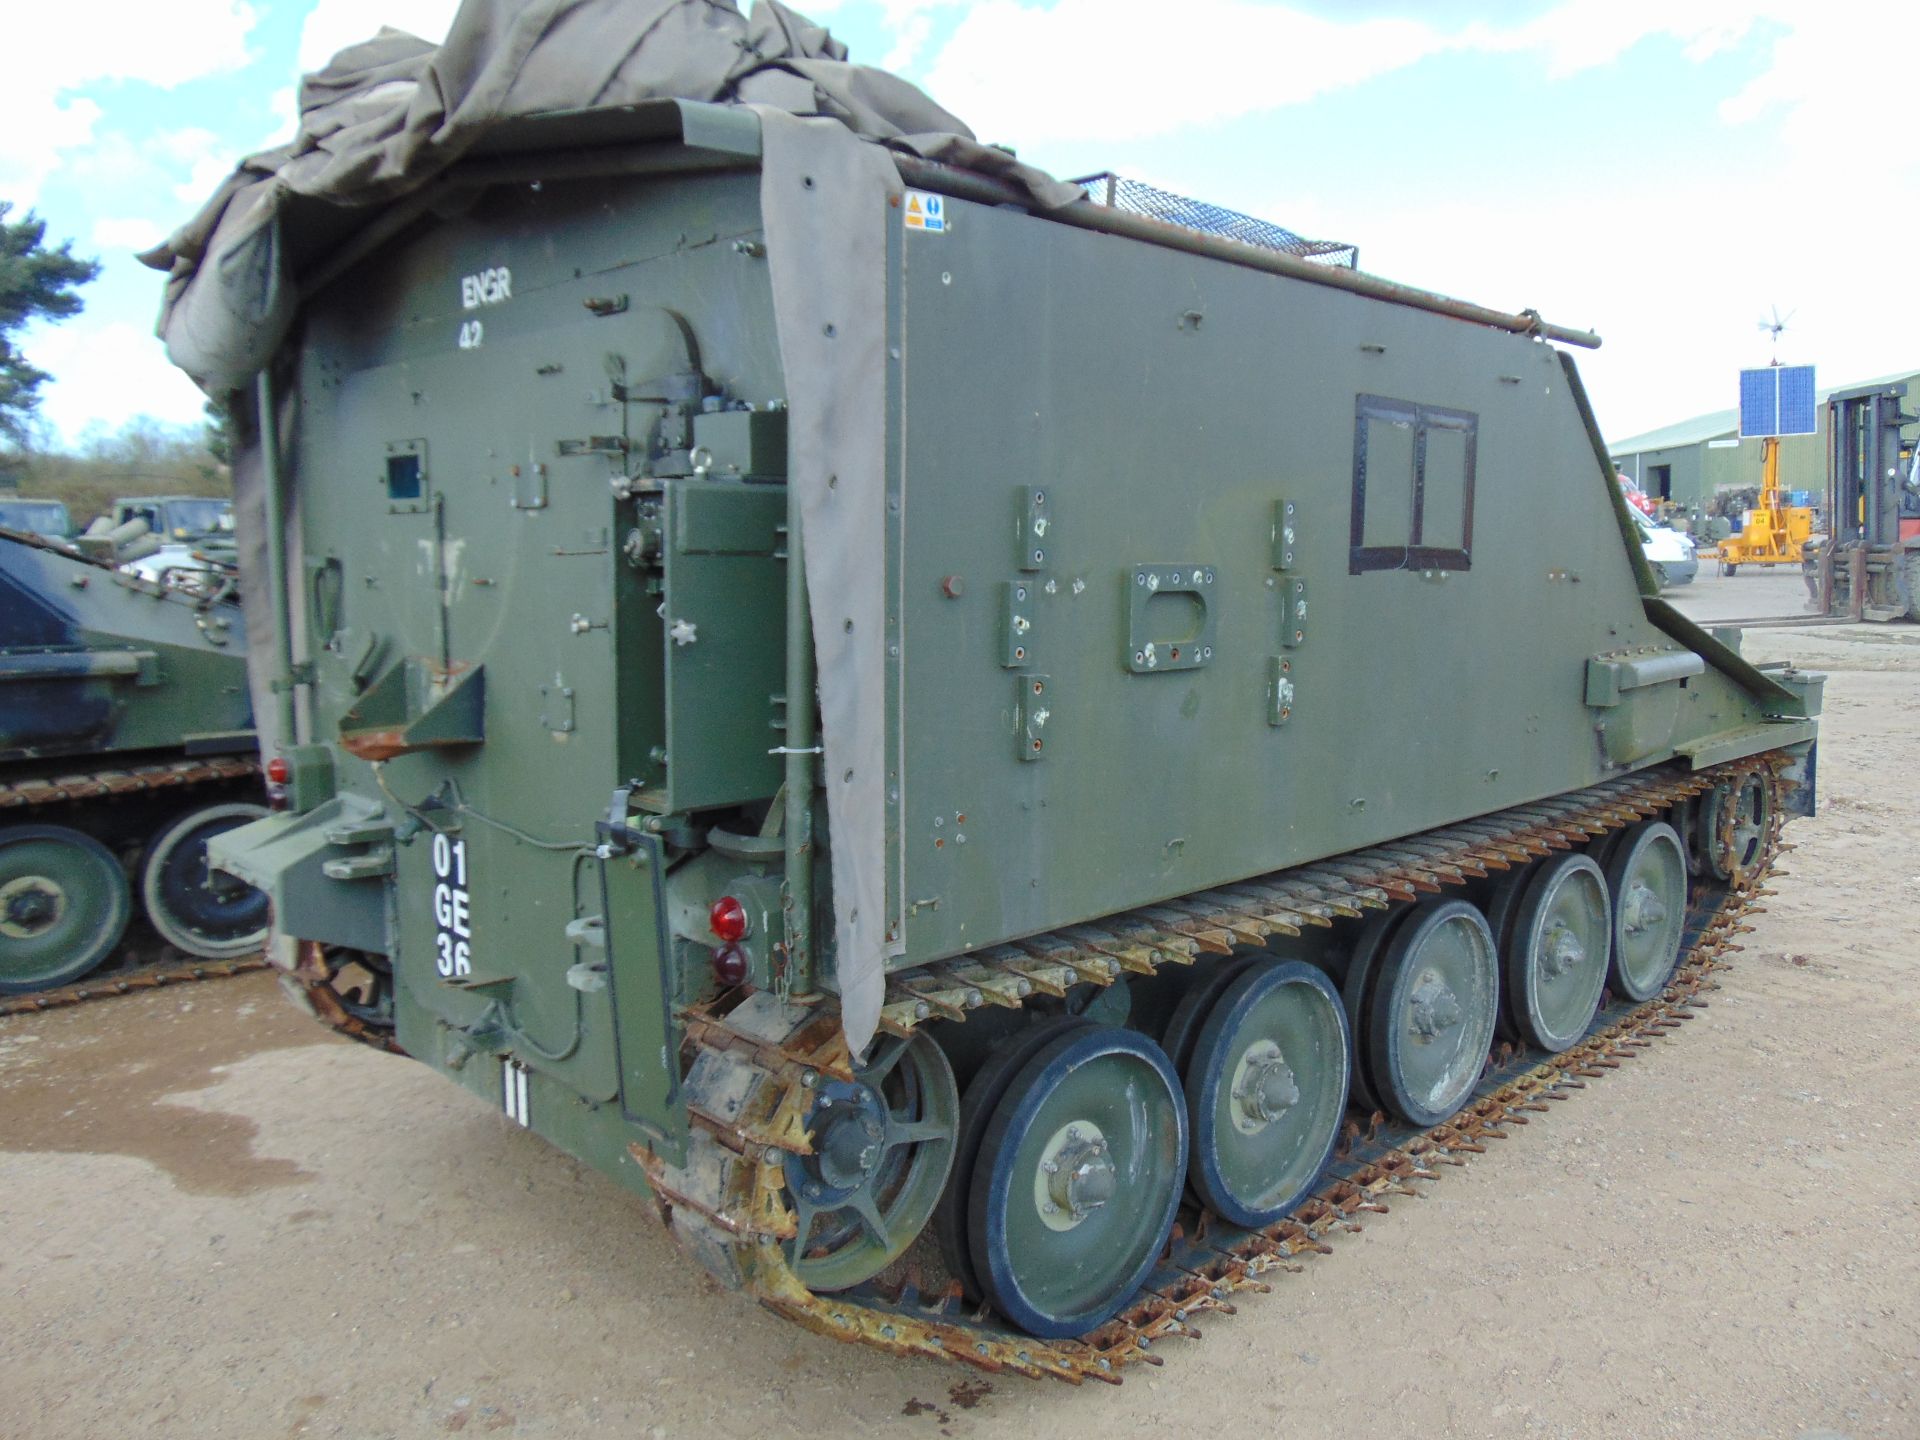 CVRT (Combat Vehicle Reconnaissance Tracked) FV105 Sultan Armoured Personnel Carrier - Image 7 of 25